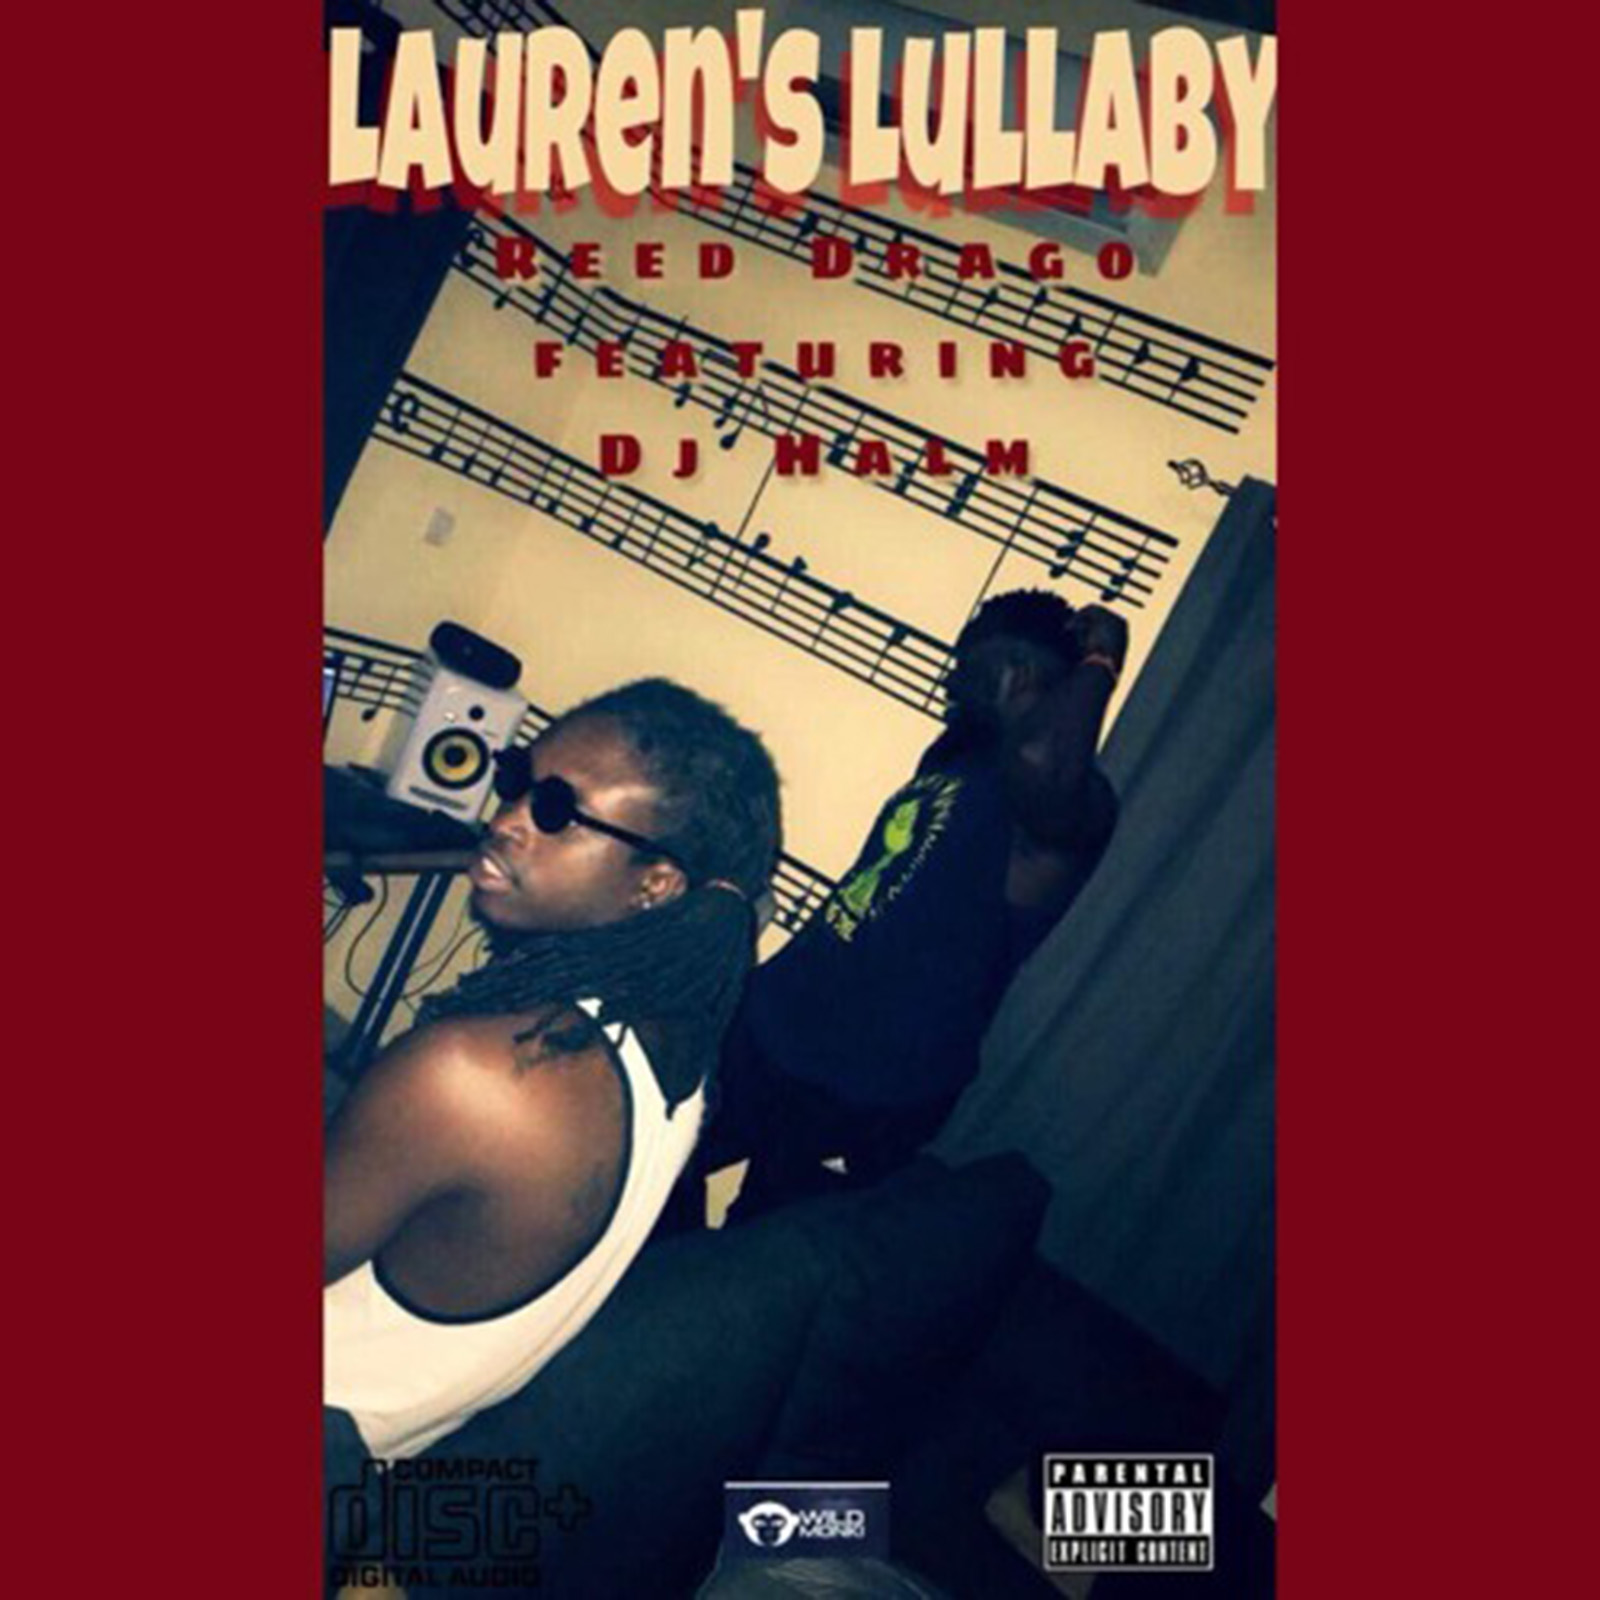 Lauren's Lullaby by Reed Drago feat. DJ Halm